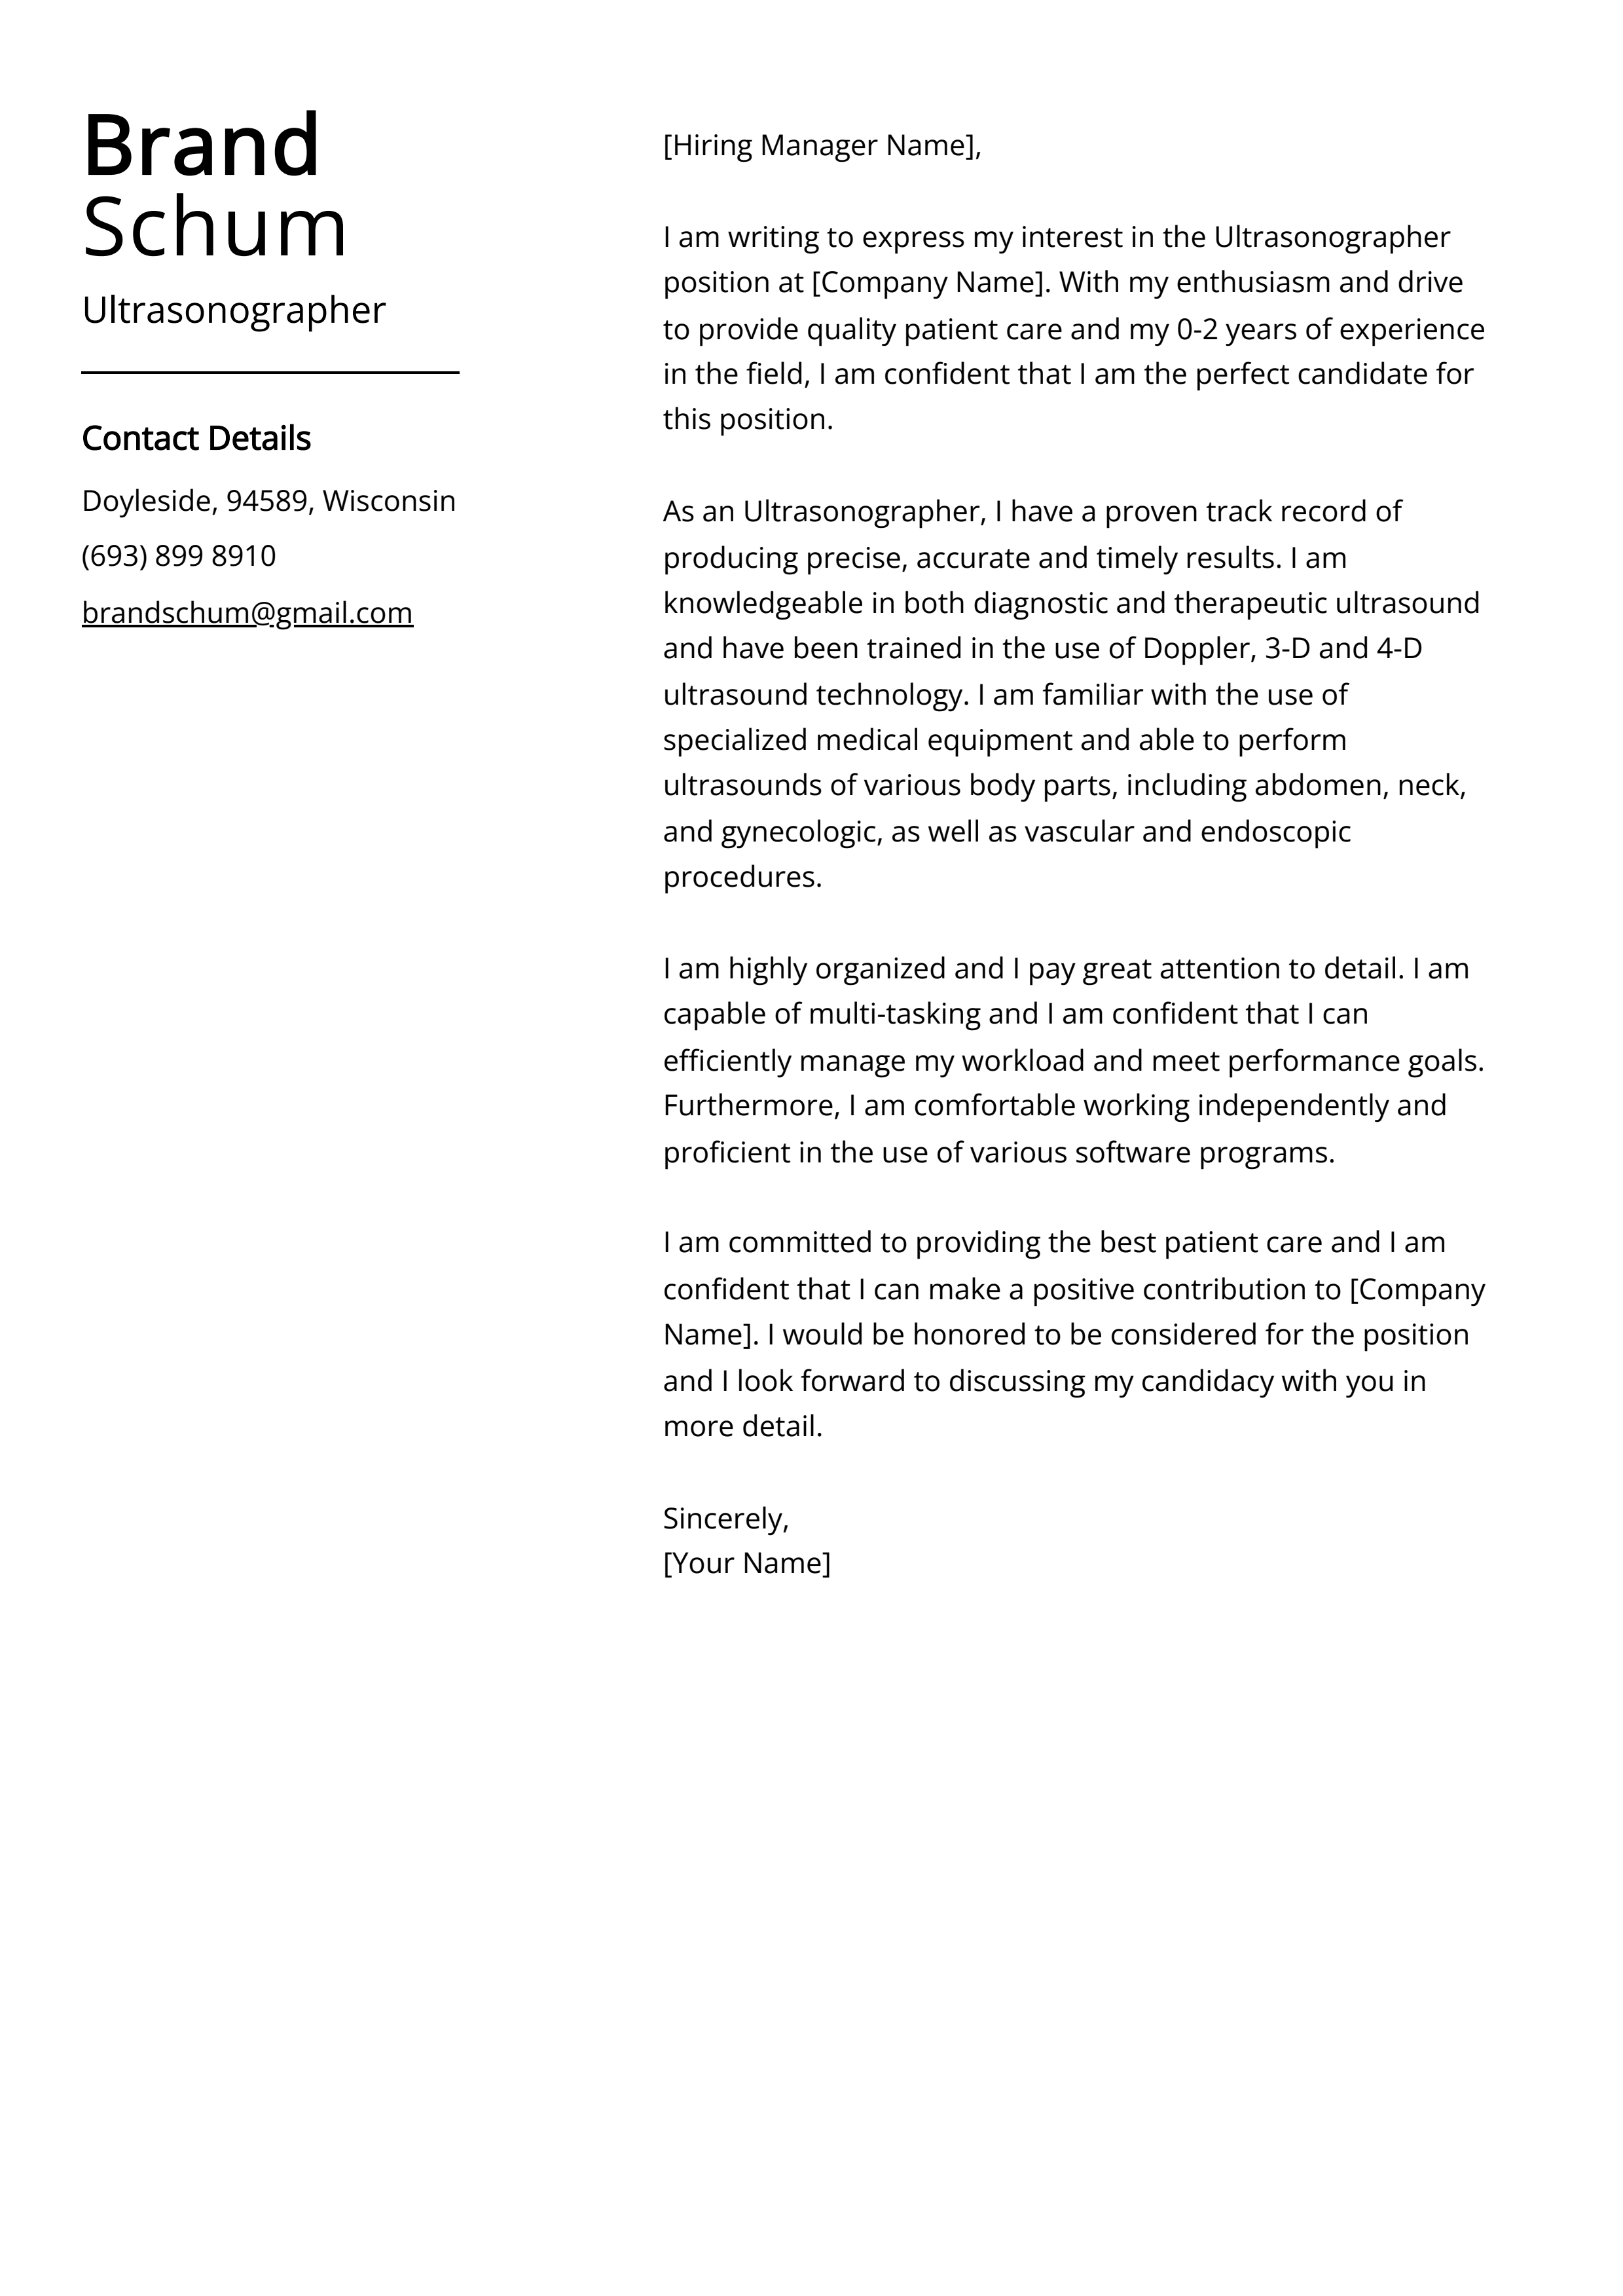 Ultrasonographer Cover Letter Example